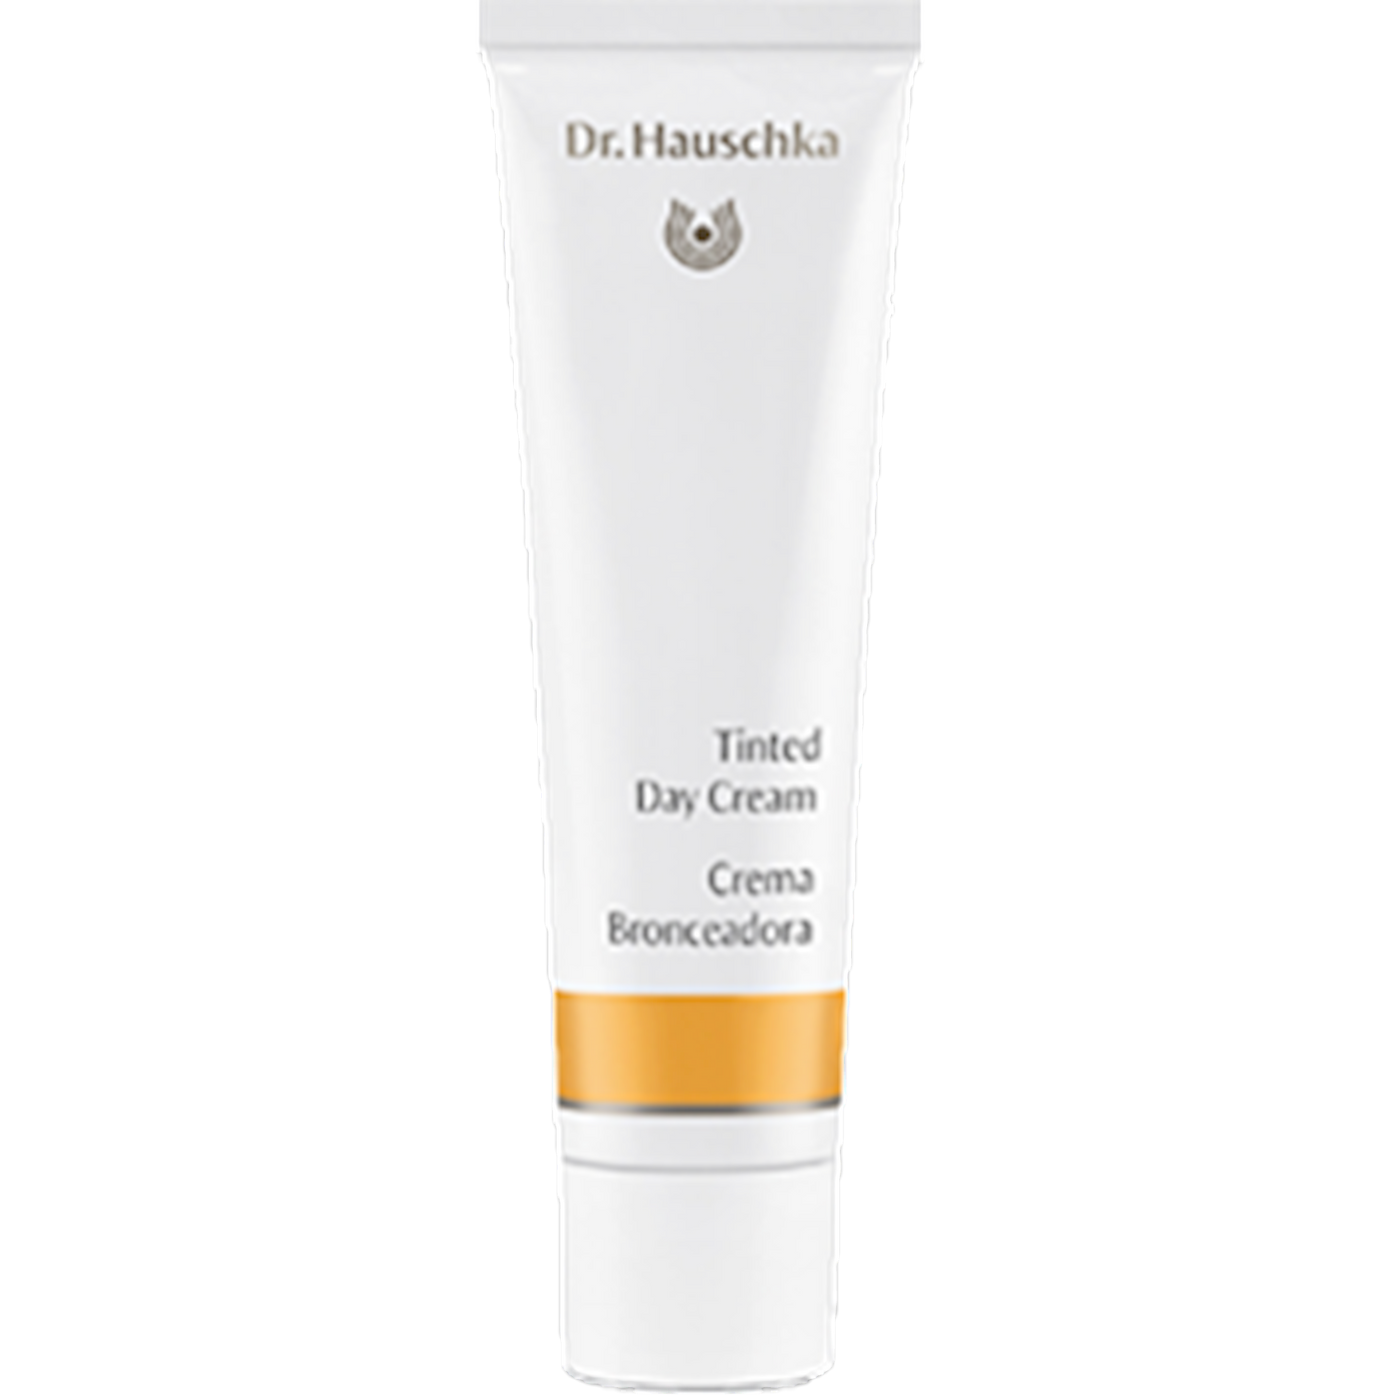 Tinted Day Cream 1.0 fl oz Curated Wellness